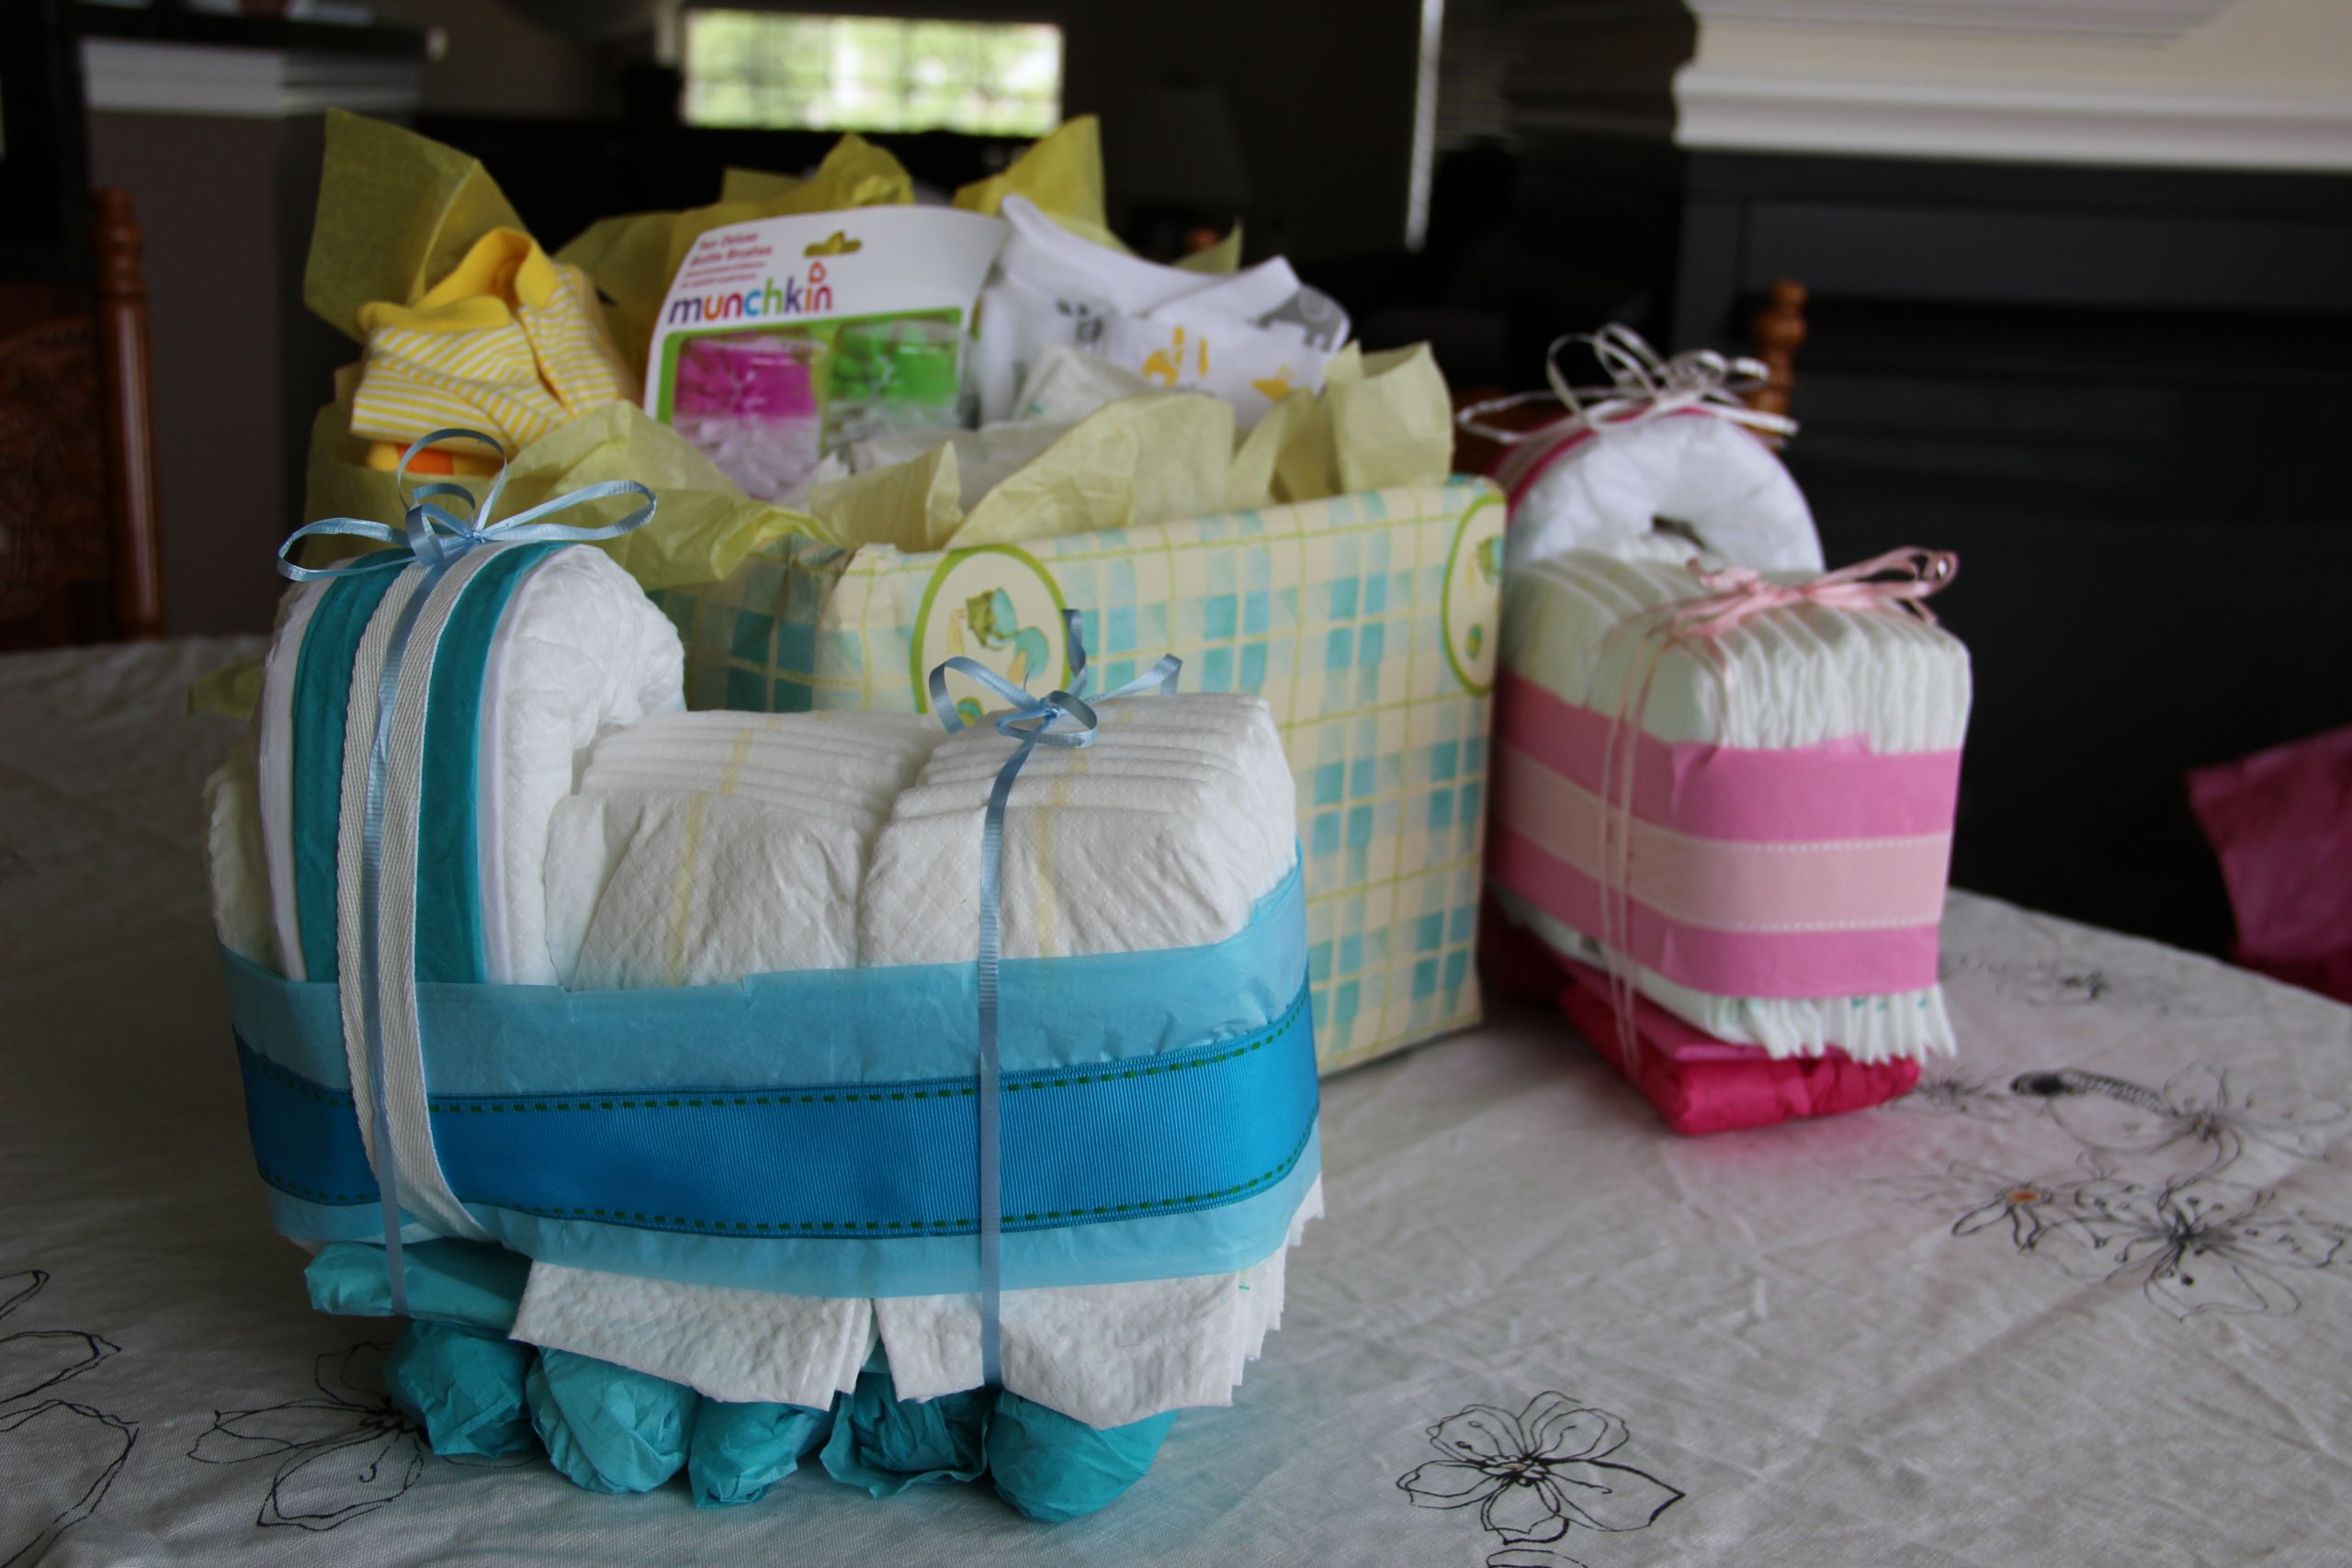 Unique Baby Shower Gift Ideas Pinterest
 The Importance of Being Cleveland